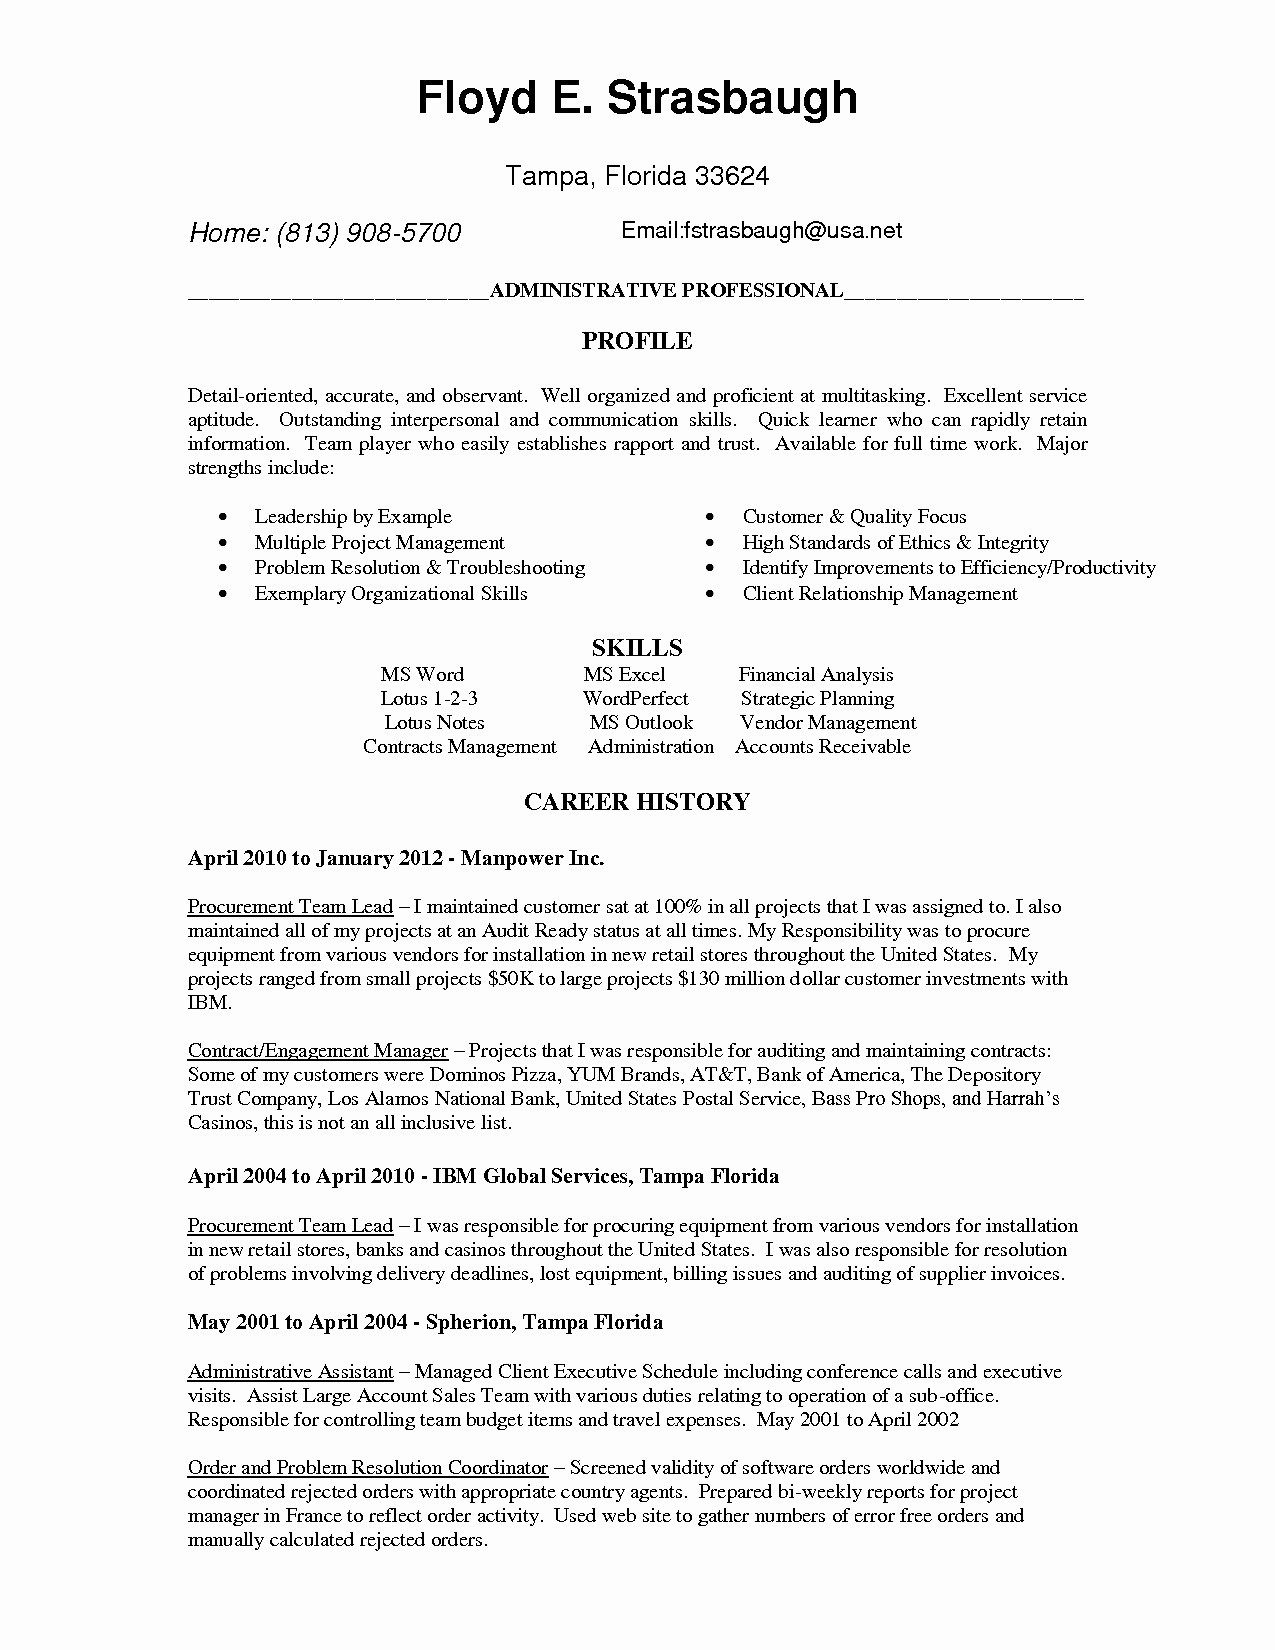 Resume Cover Letter Template Word Free - â Free Microsoft Word Resume Templates Awesome Professional Job